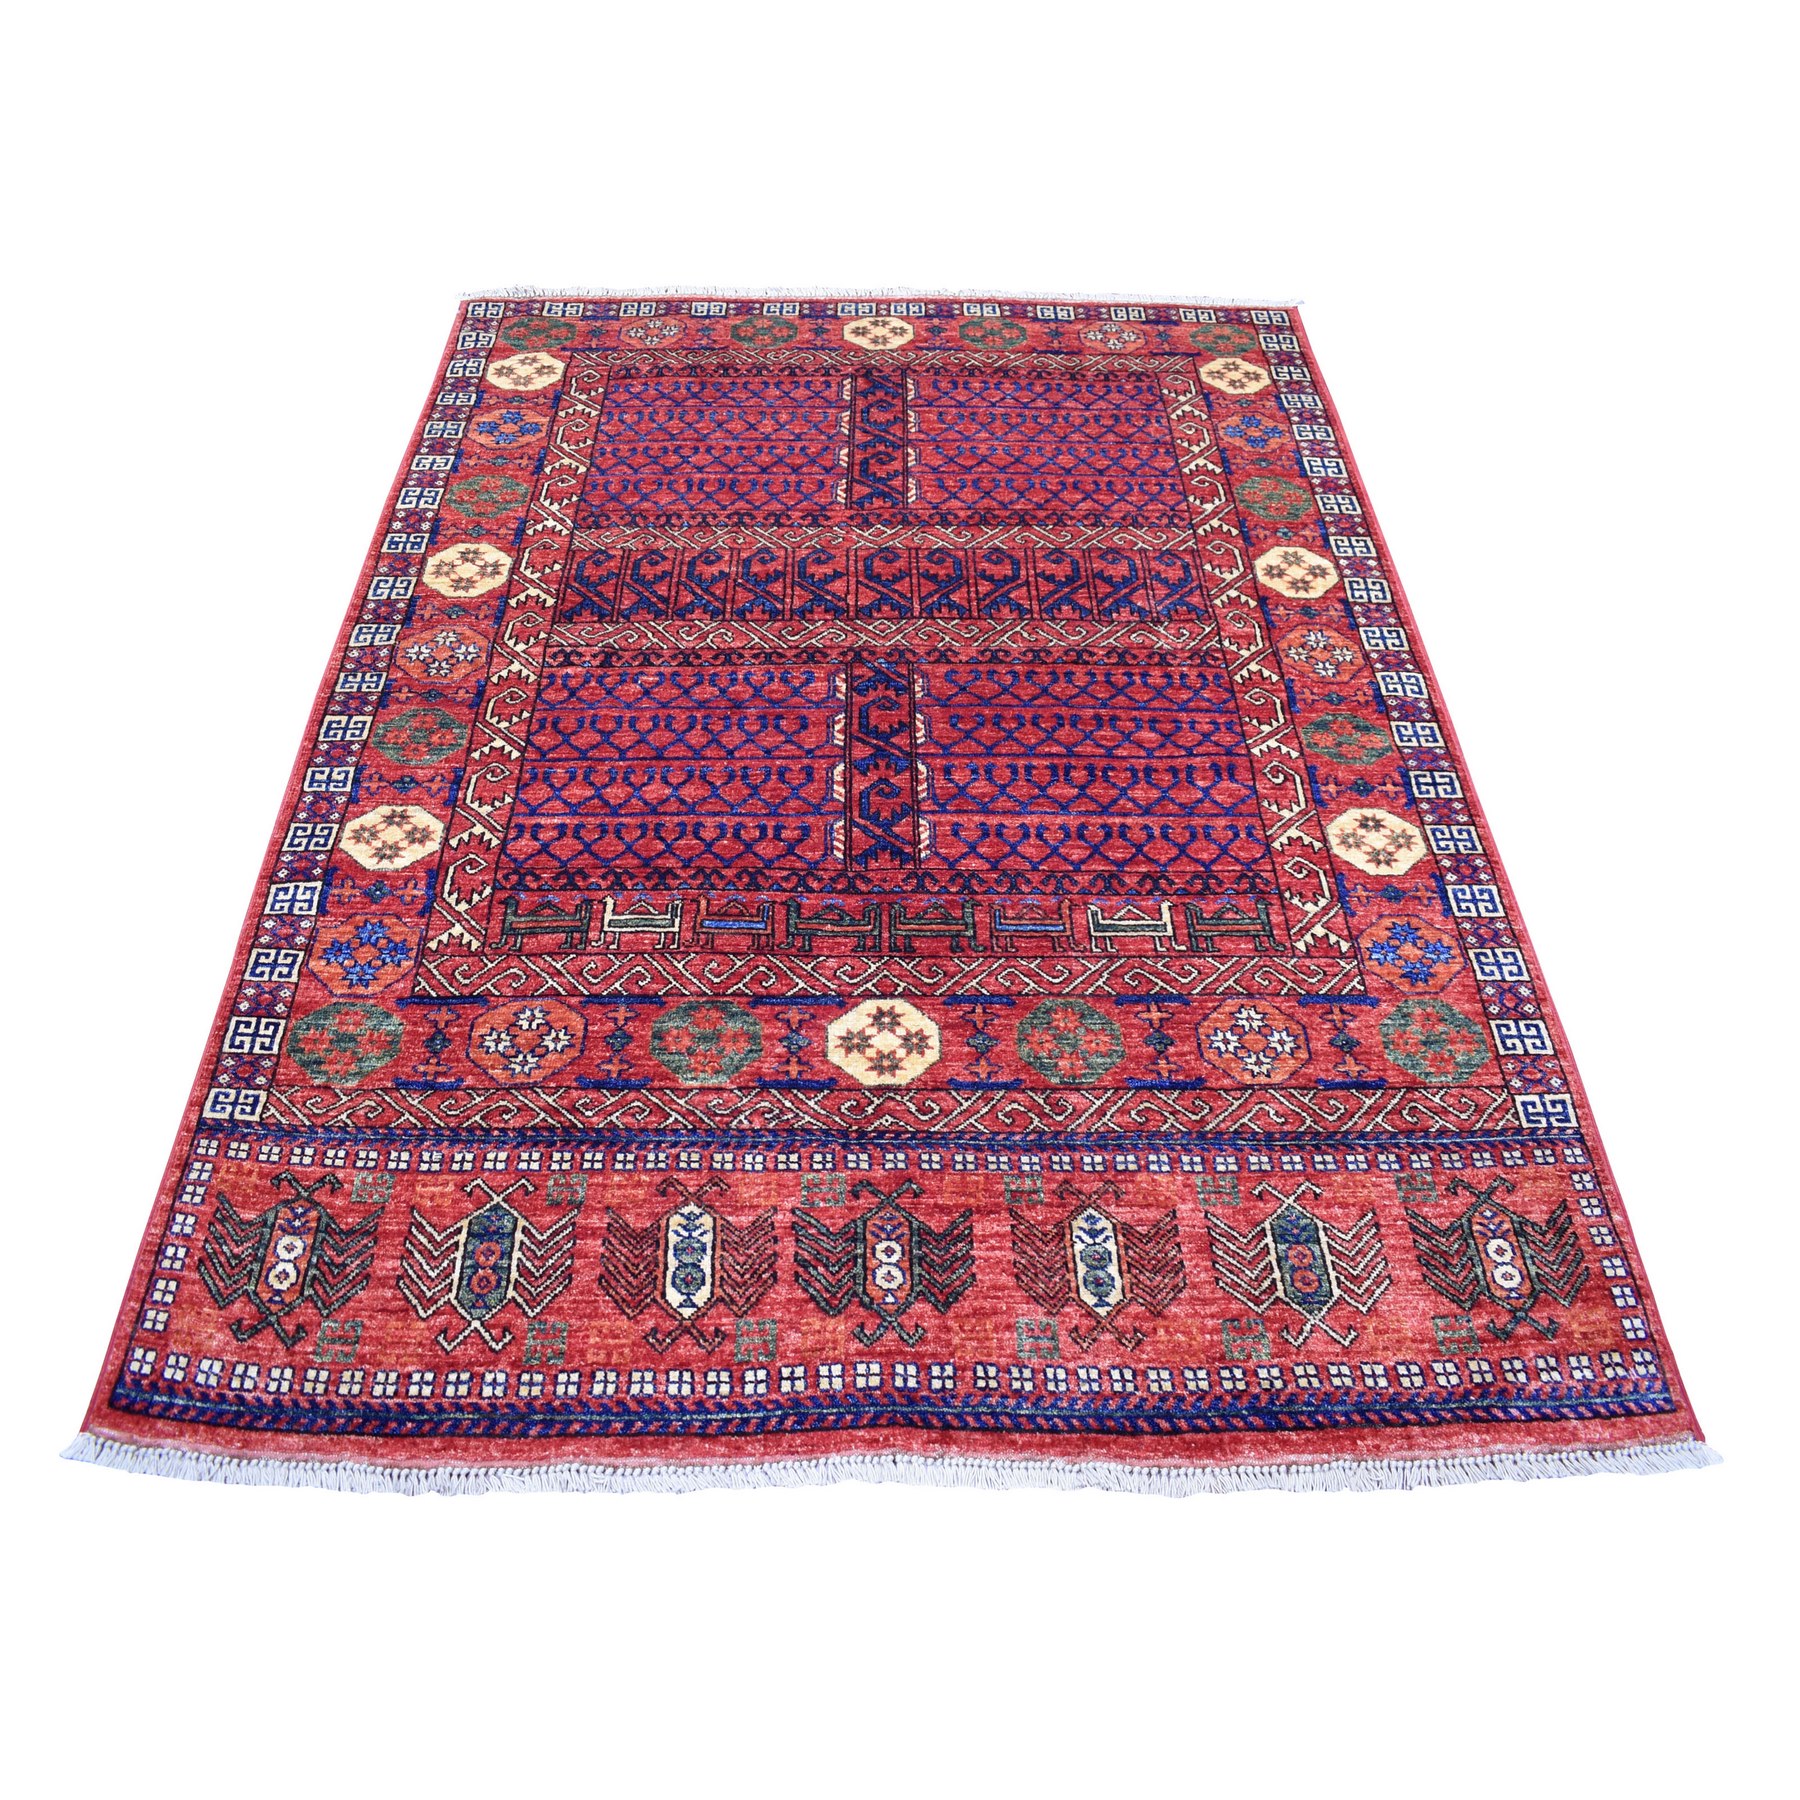 5'1"x6'9" Red with Pop of Color Hutchlu Design Afghan Ersari Hand Woven Soft, Velvety Wool Oriental Rug 